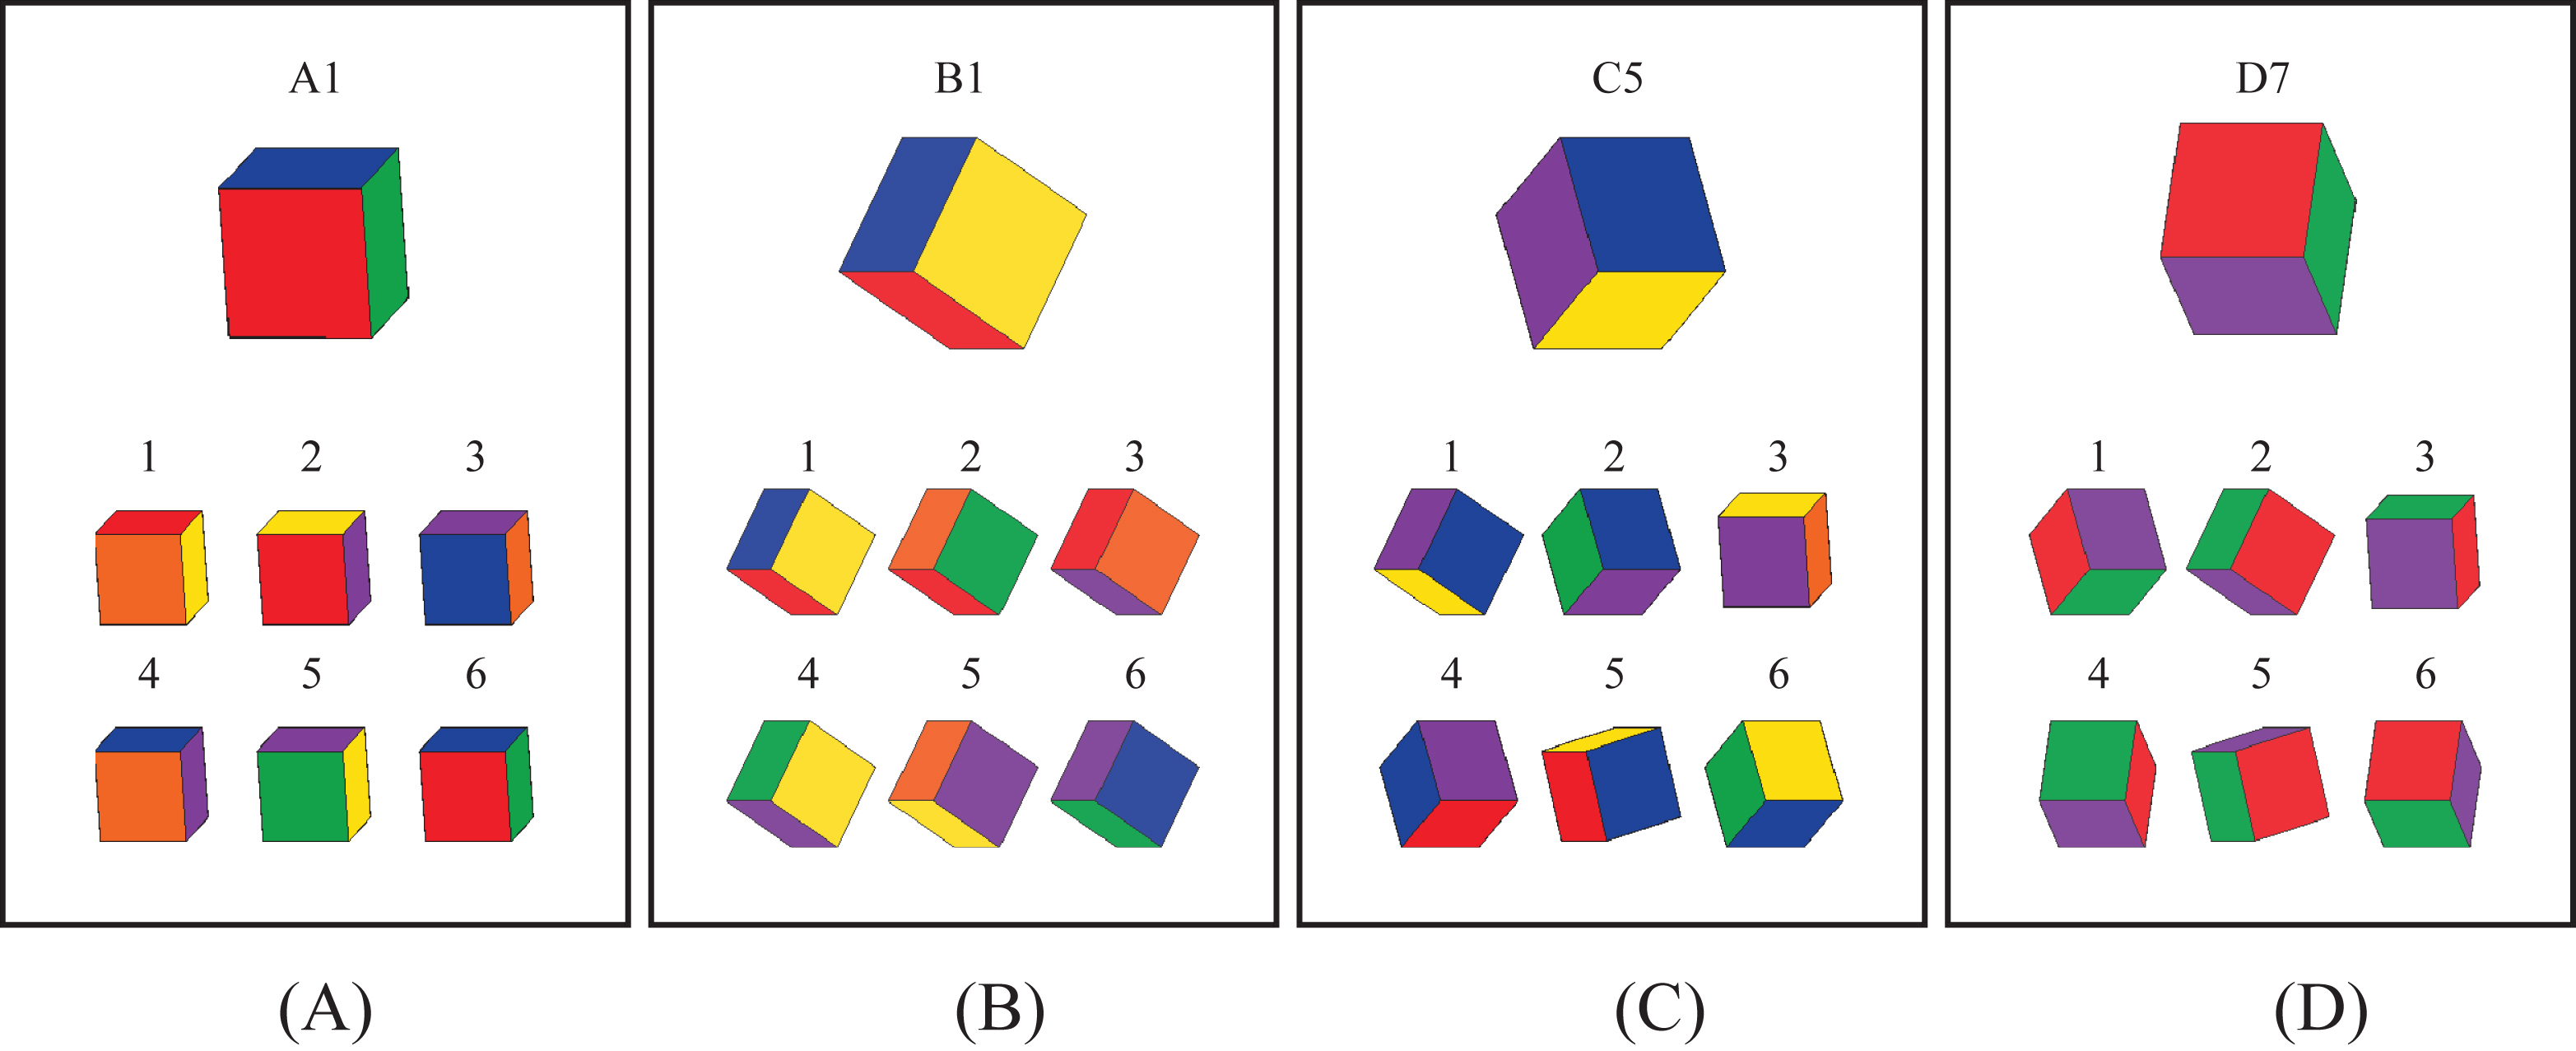 Examples of Task Sheets. RCCT A: differently coloured cubes identical in orientation (the correct test cube is on lower row furthest to the right). RCCT B: differently coloured cubes identical in orientation, but in a non-canonical view (correct cube is in the upper row, furthest to the left). RCCT C: rotational variance between distracter cubes (the correct cube is in the upper row, furthest to the left). RCCT D: rotational variance between distracter cubes, but all cubes have the same colours (the correct cube is in the lower row in the middle).